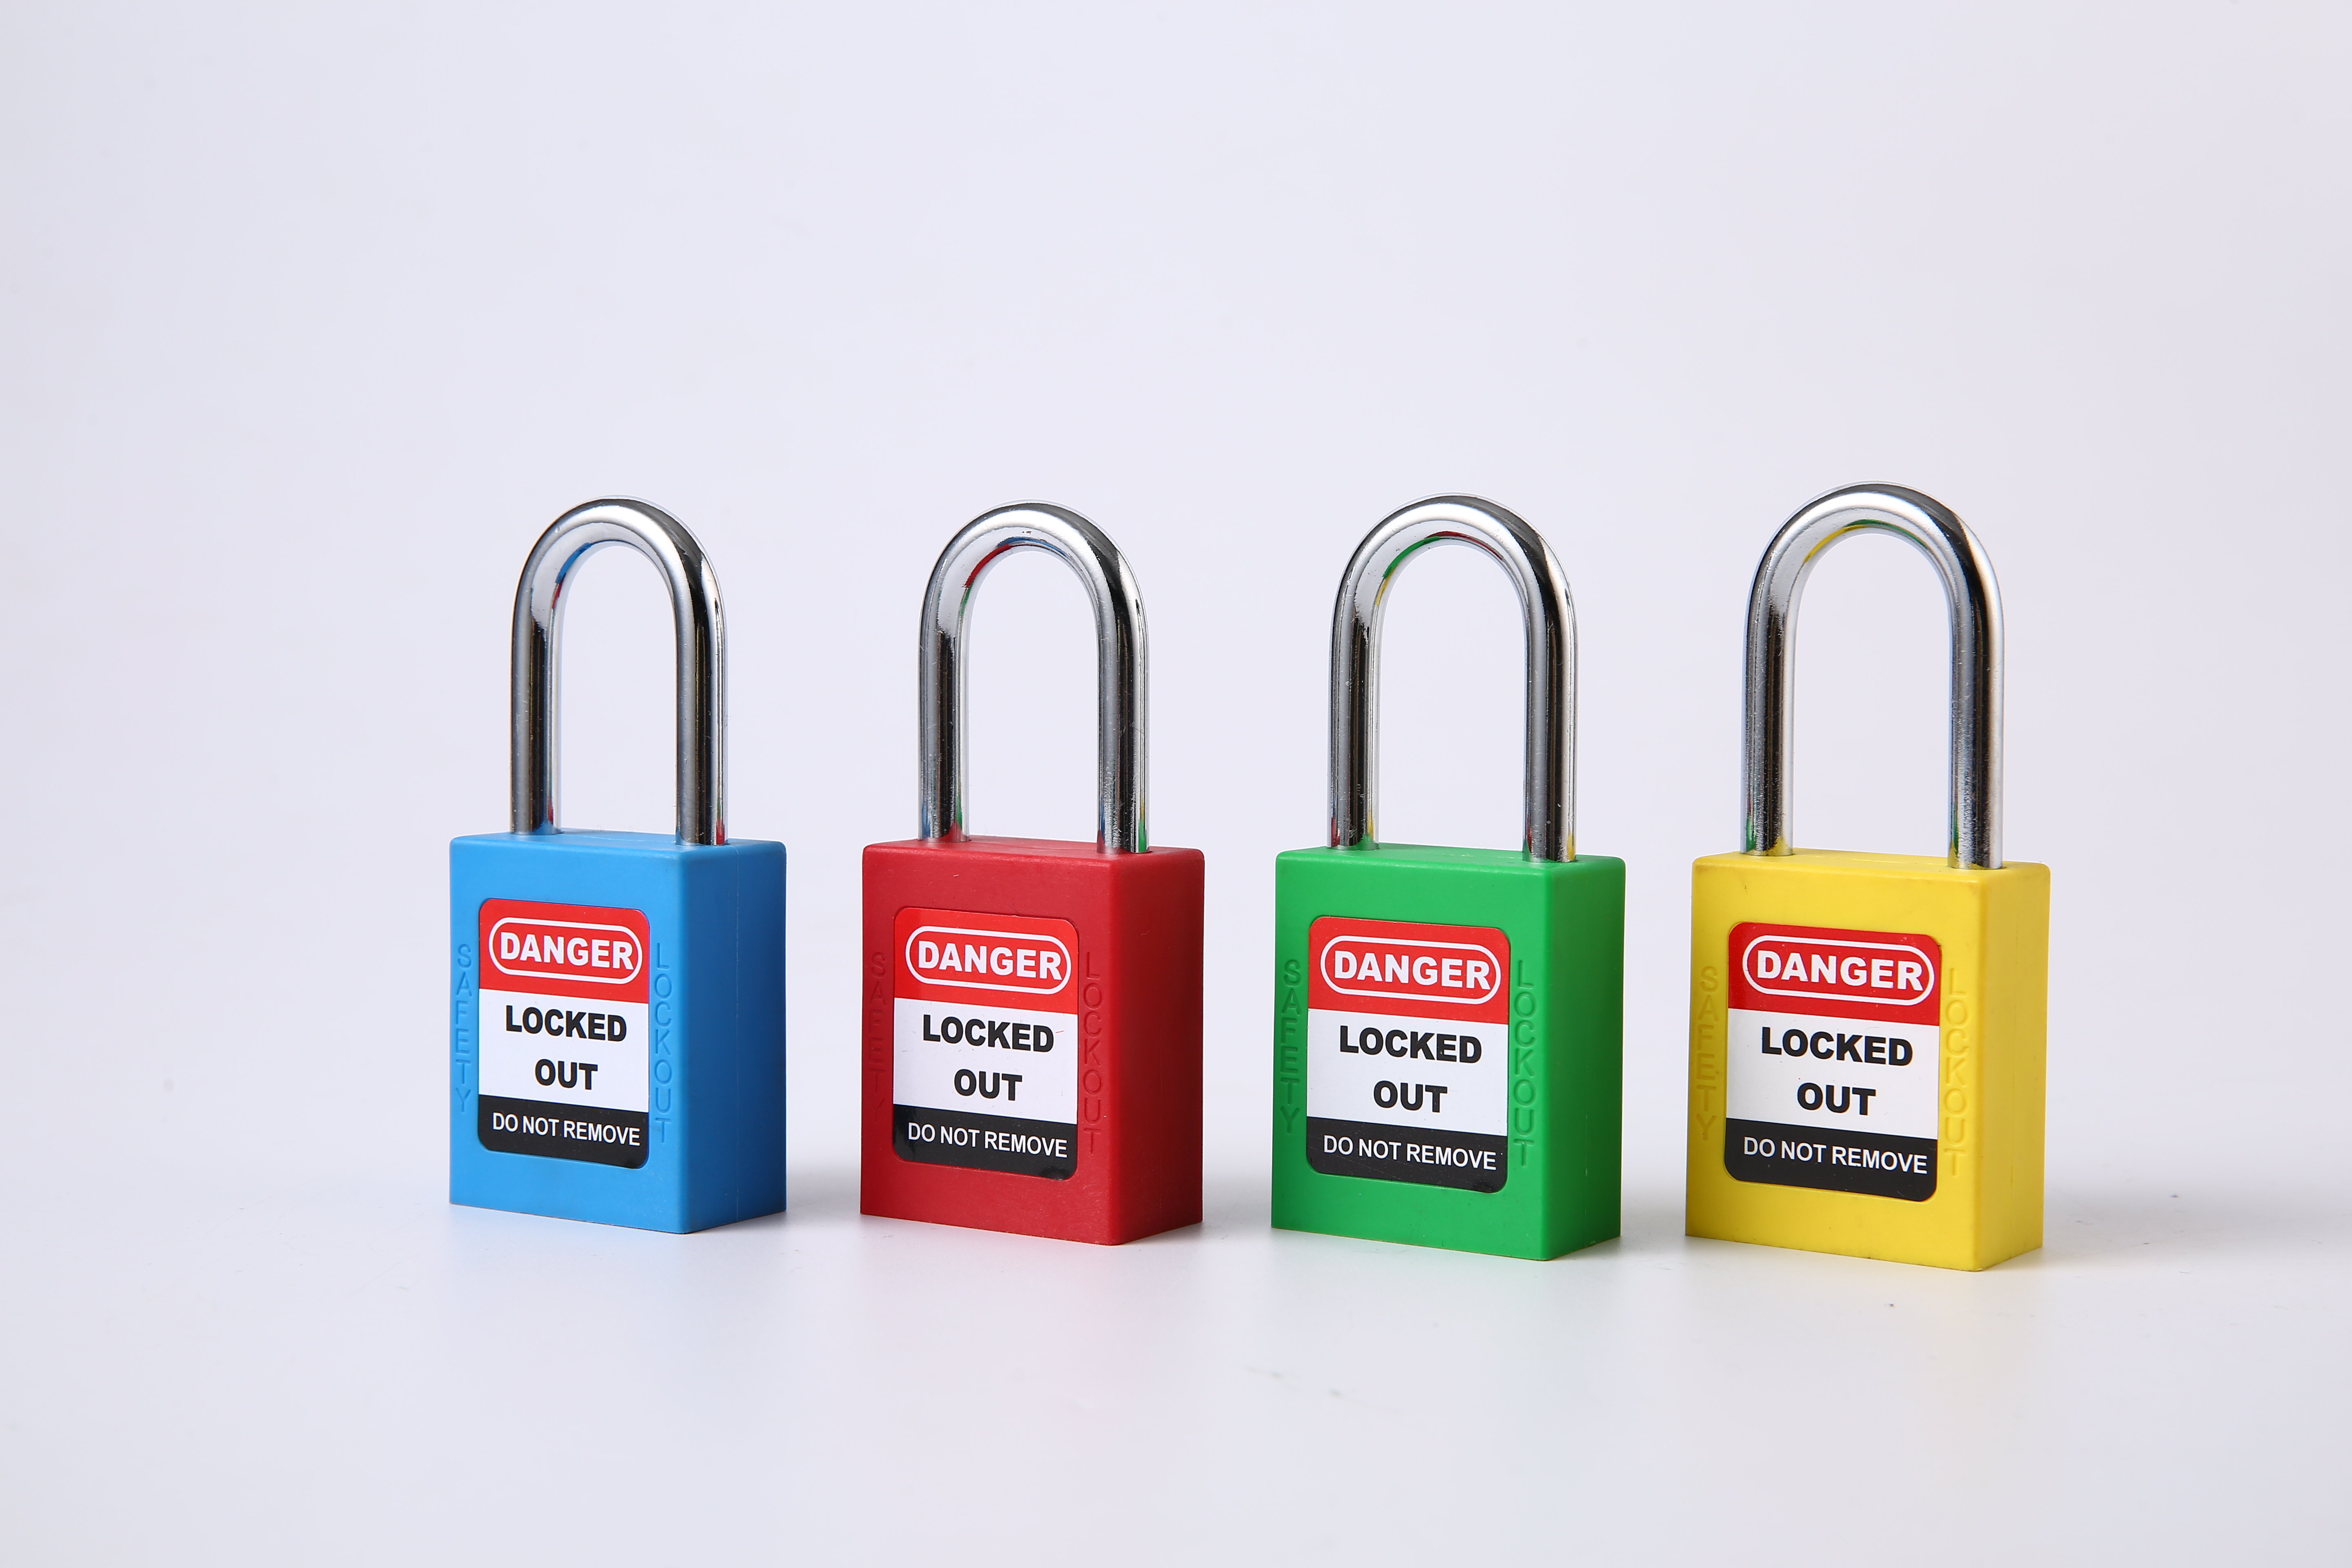 Interpretation of related concepts of lockout and tagout